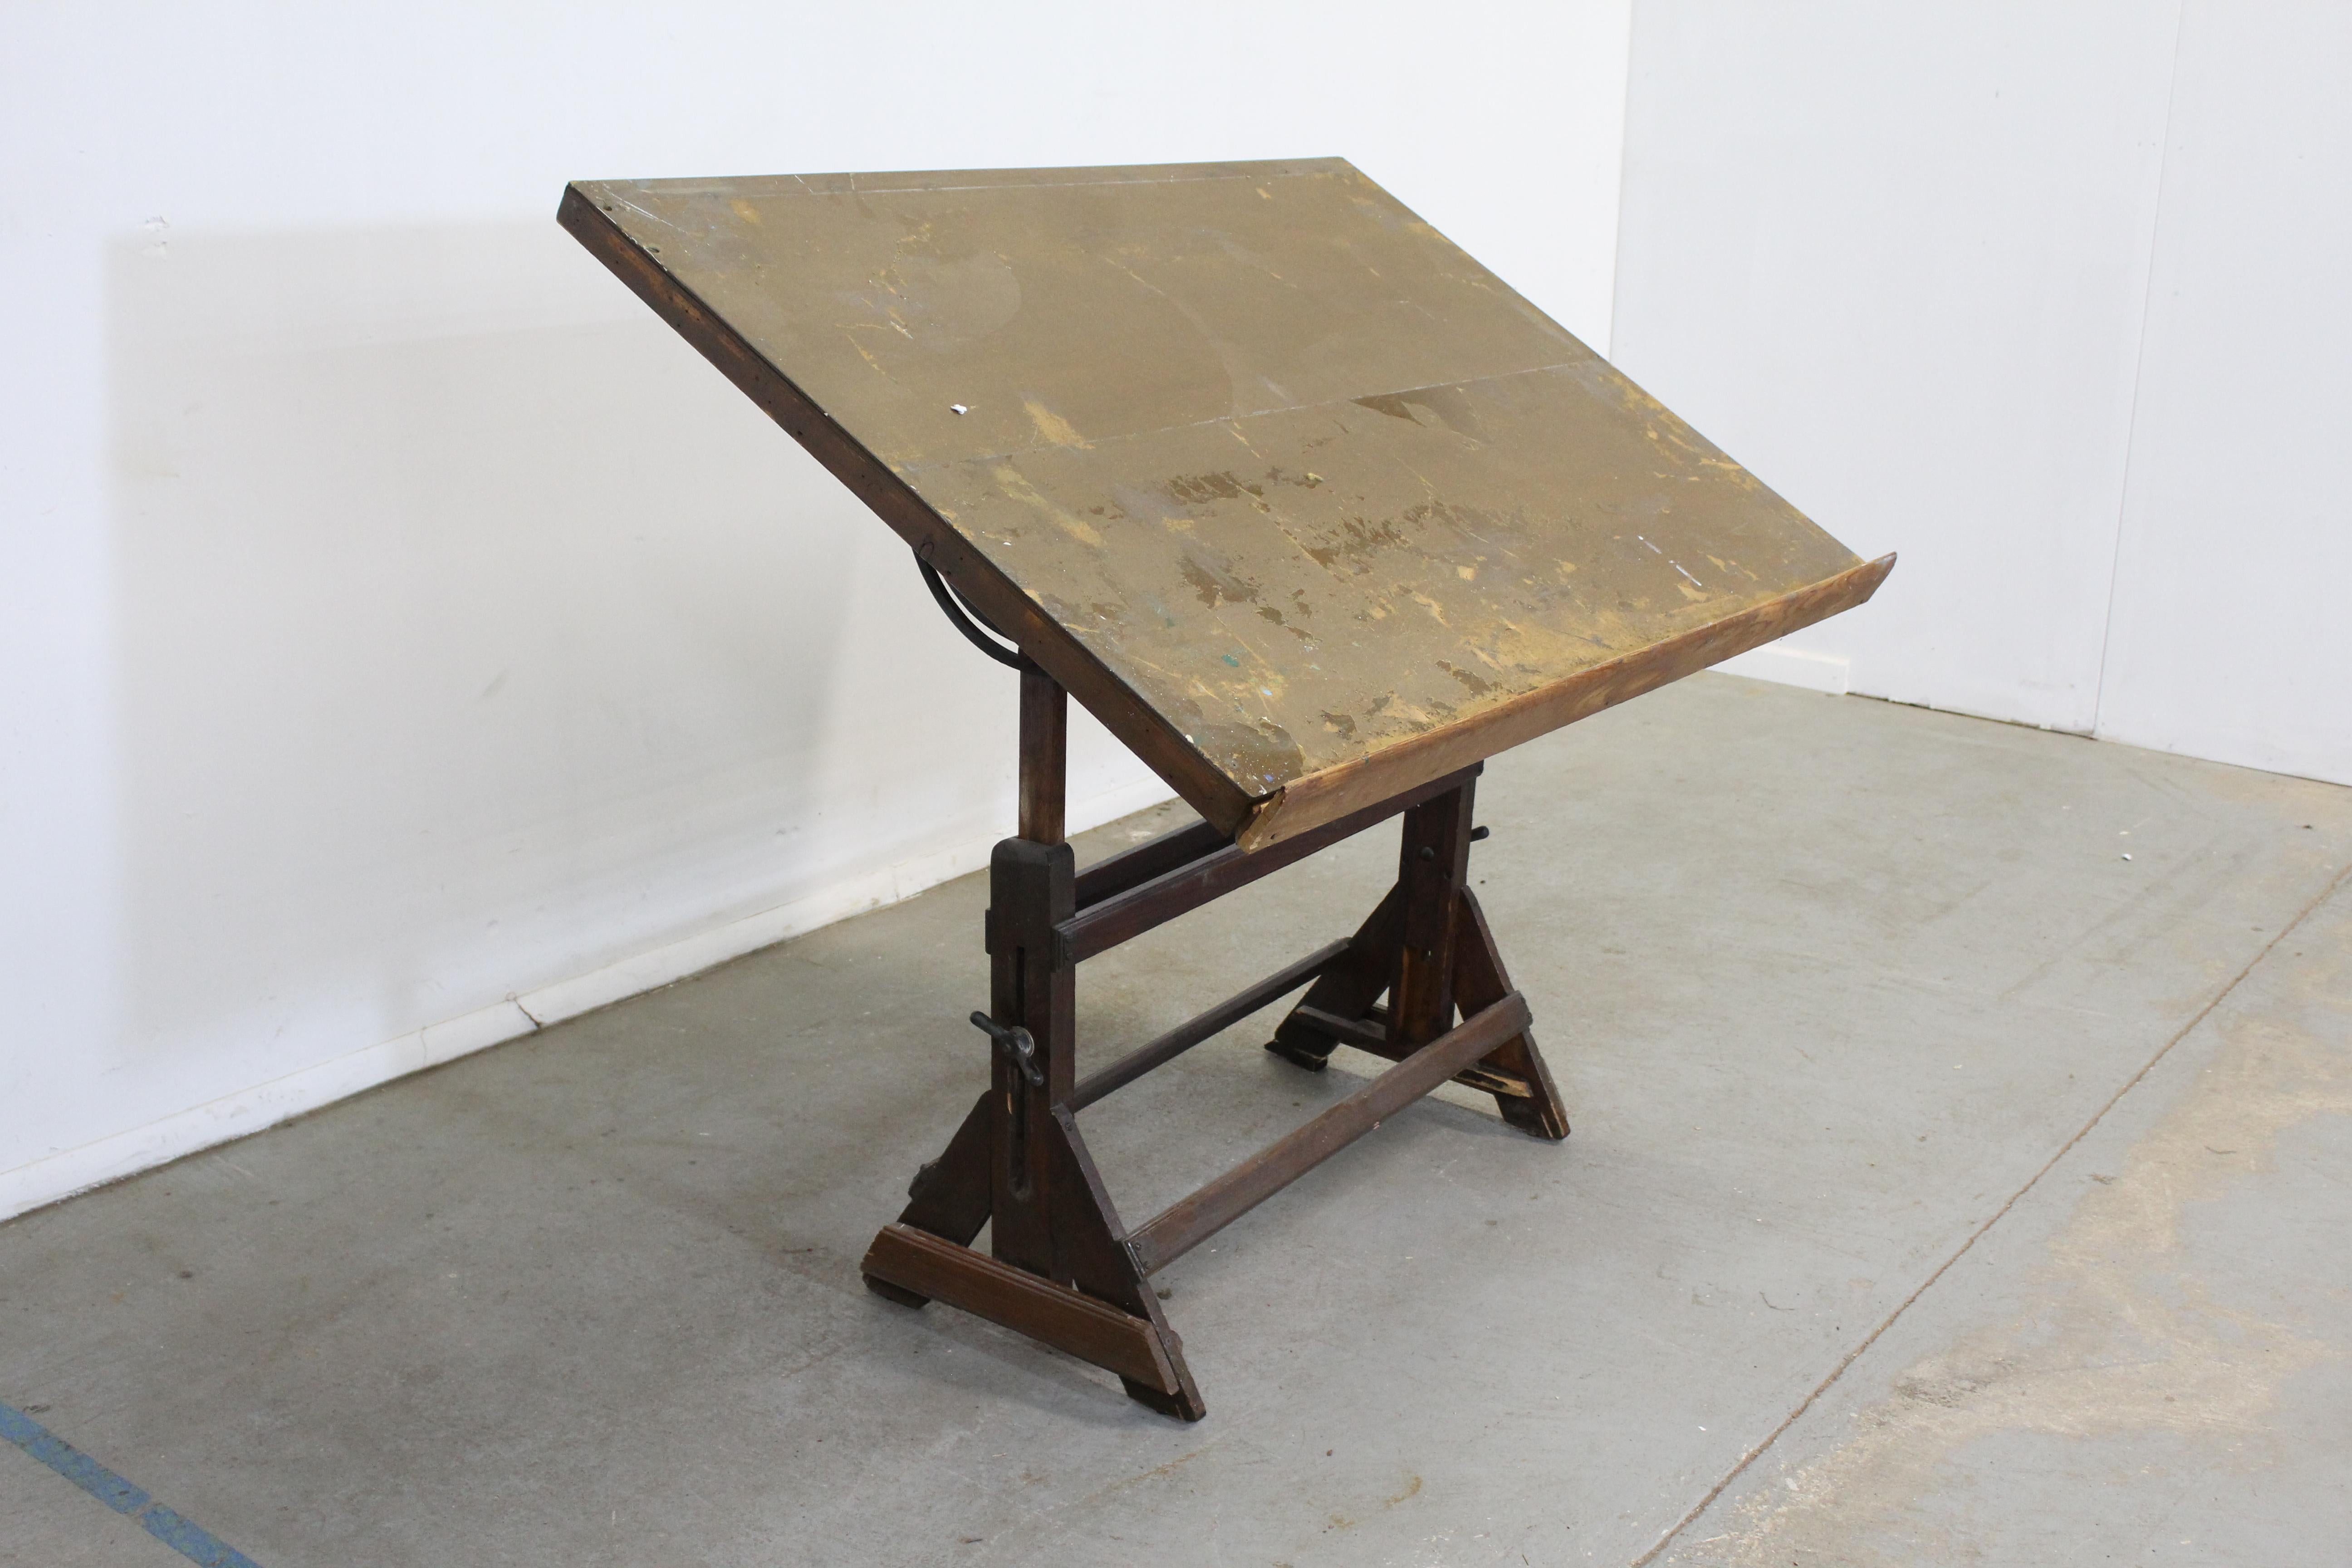 Antique drafting table with adjustable top

What a find. Offered is an antique drafting table that is estimated early 1900's. The top is adjustable to tilt to your liking. It is in vintage condition with minor surface wear/chips. It is